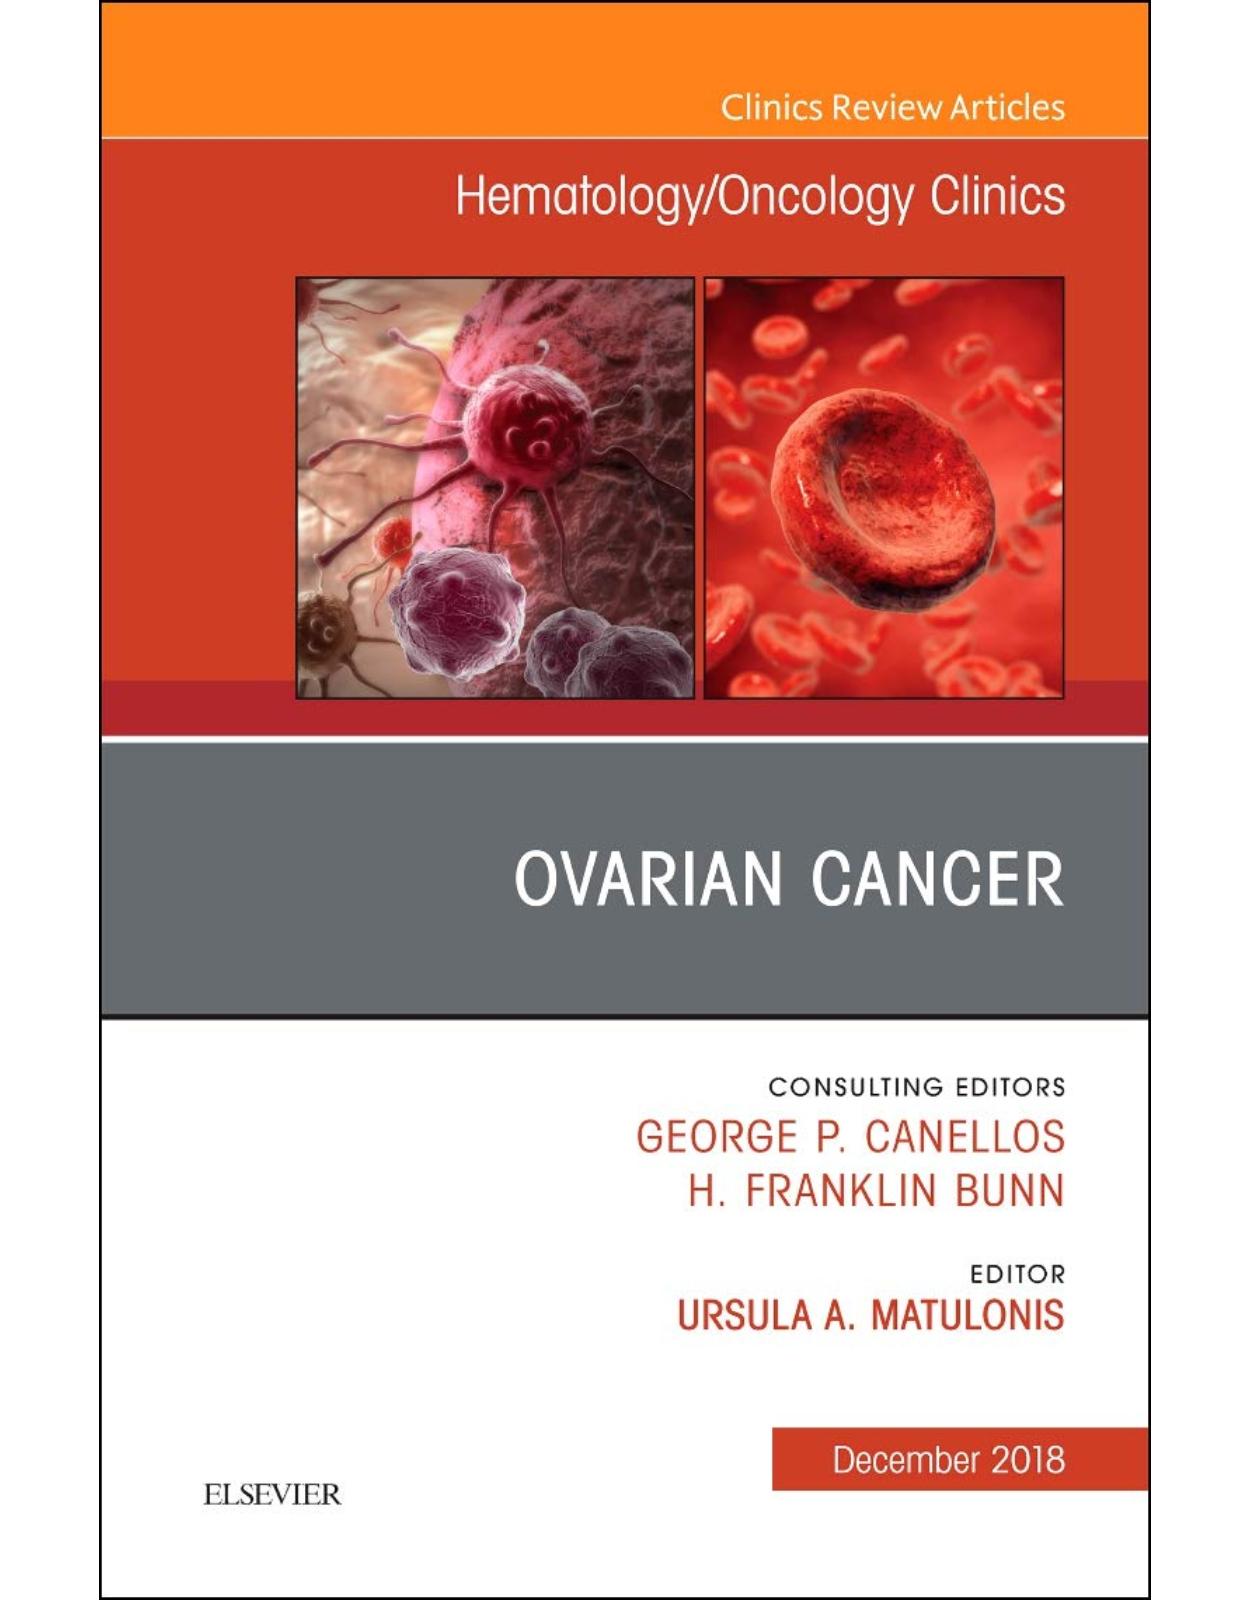 Ovarian Cancer, An Issue of Hematology/Oncology Clinics of North America, Volume 32-6